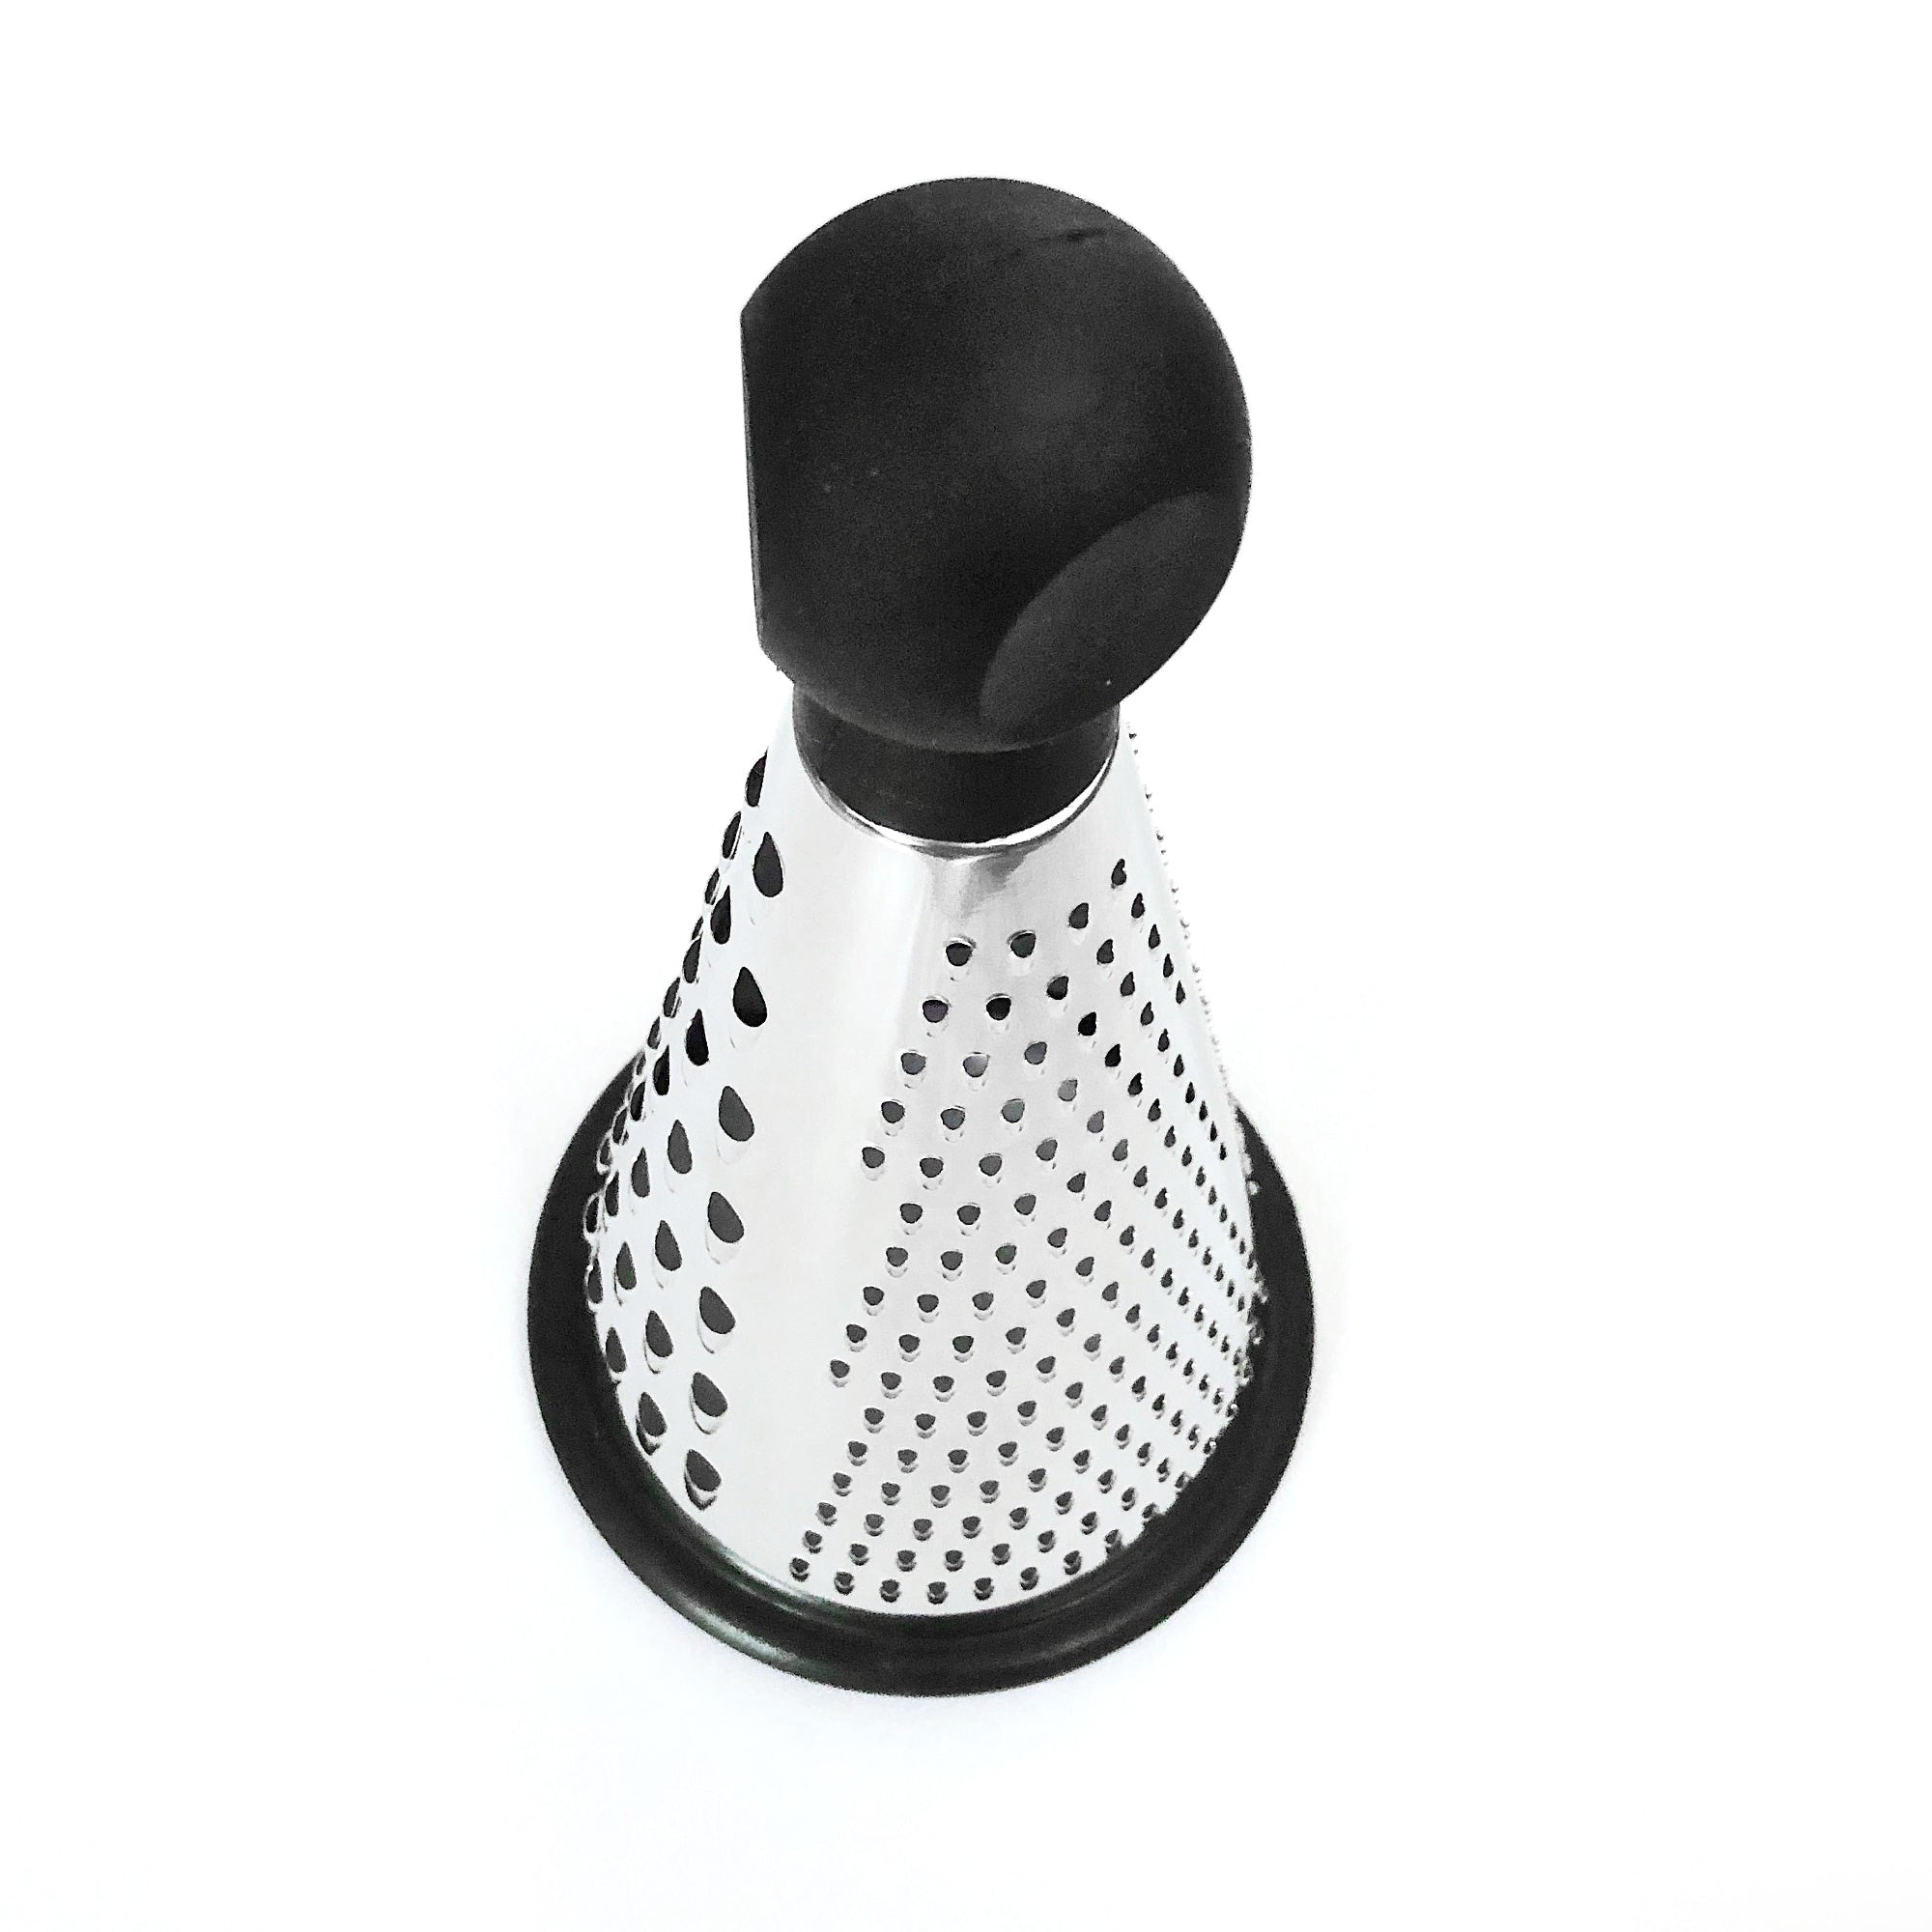 Stainless Steel Cheese Grater - 3 Sided